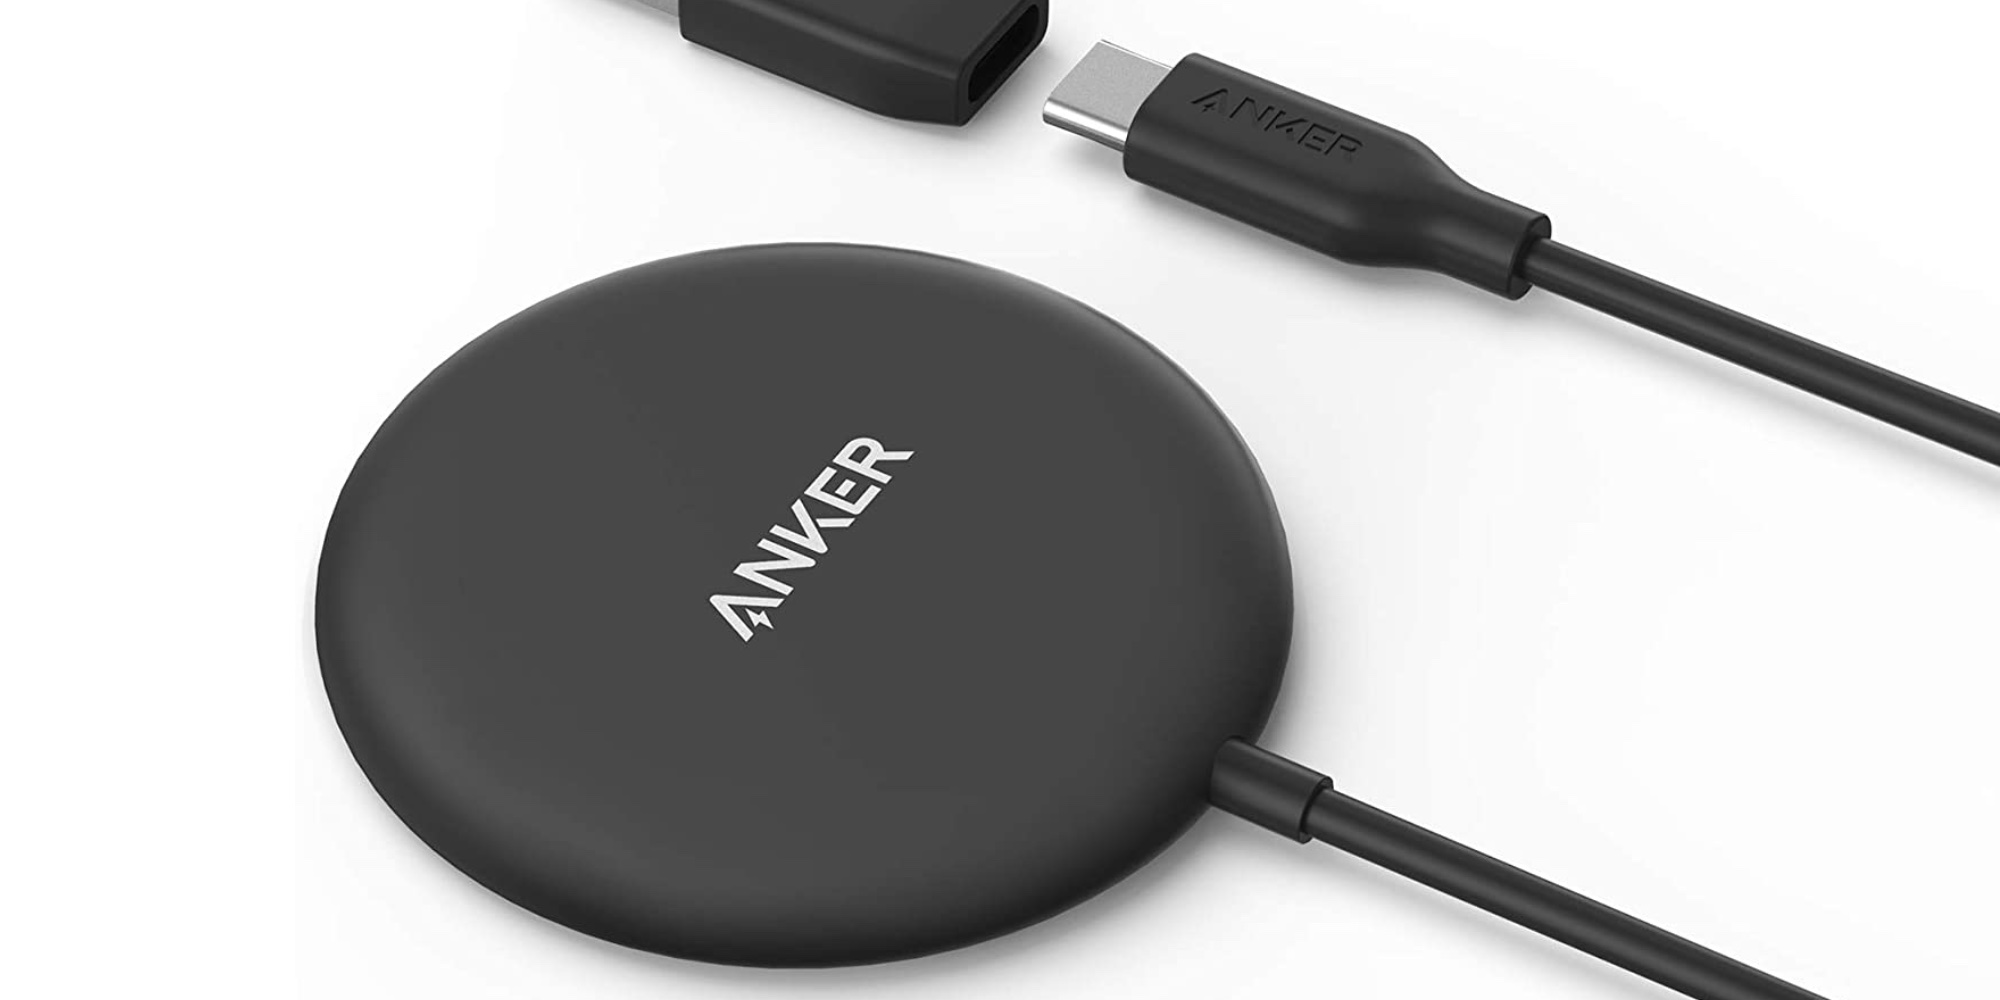 Anker PowerExpand USB-C Hub debuts with 9-in-2 design - 9to5Toys